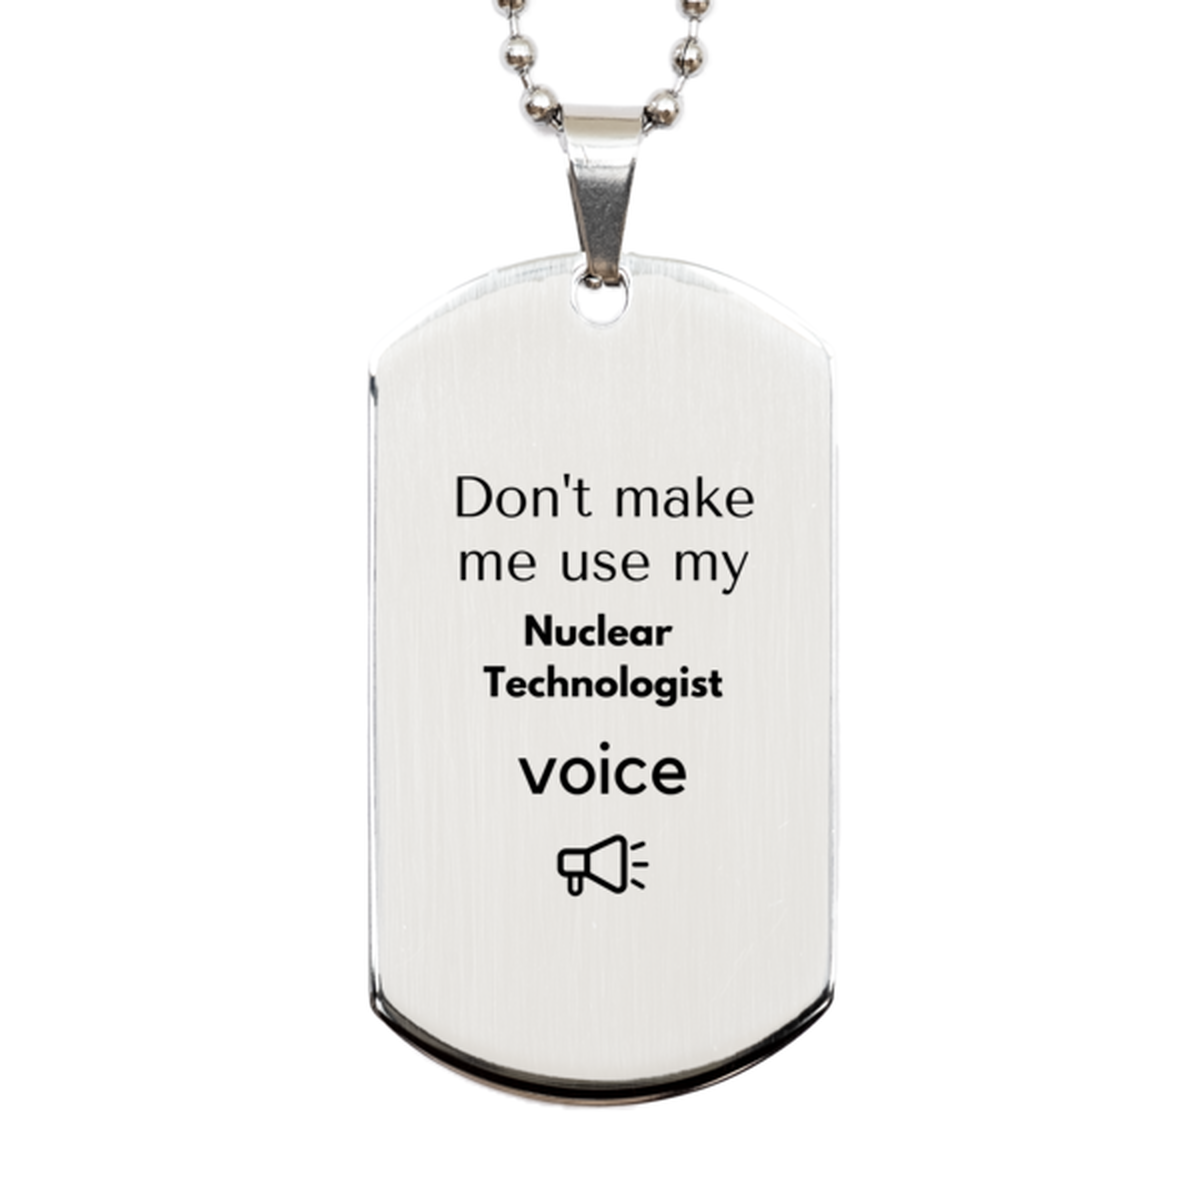 Don't make me use my Nuclear Technologist voice, Sarcasm Nuclear Technologist Gifts, Christmas Nuclear Technologist Silver Dog Tag Birthday Unique Gifts For Nuclear Technologist Coworkers, Men, Women, Colleague, Friends